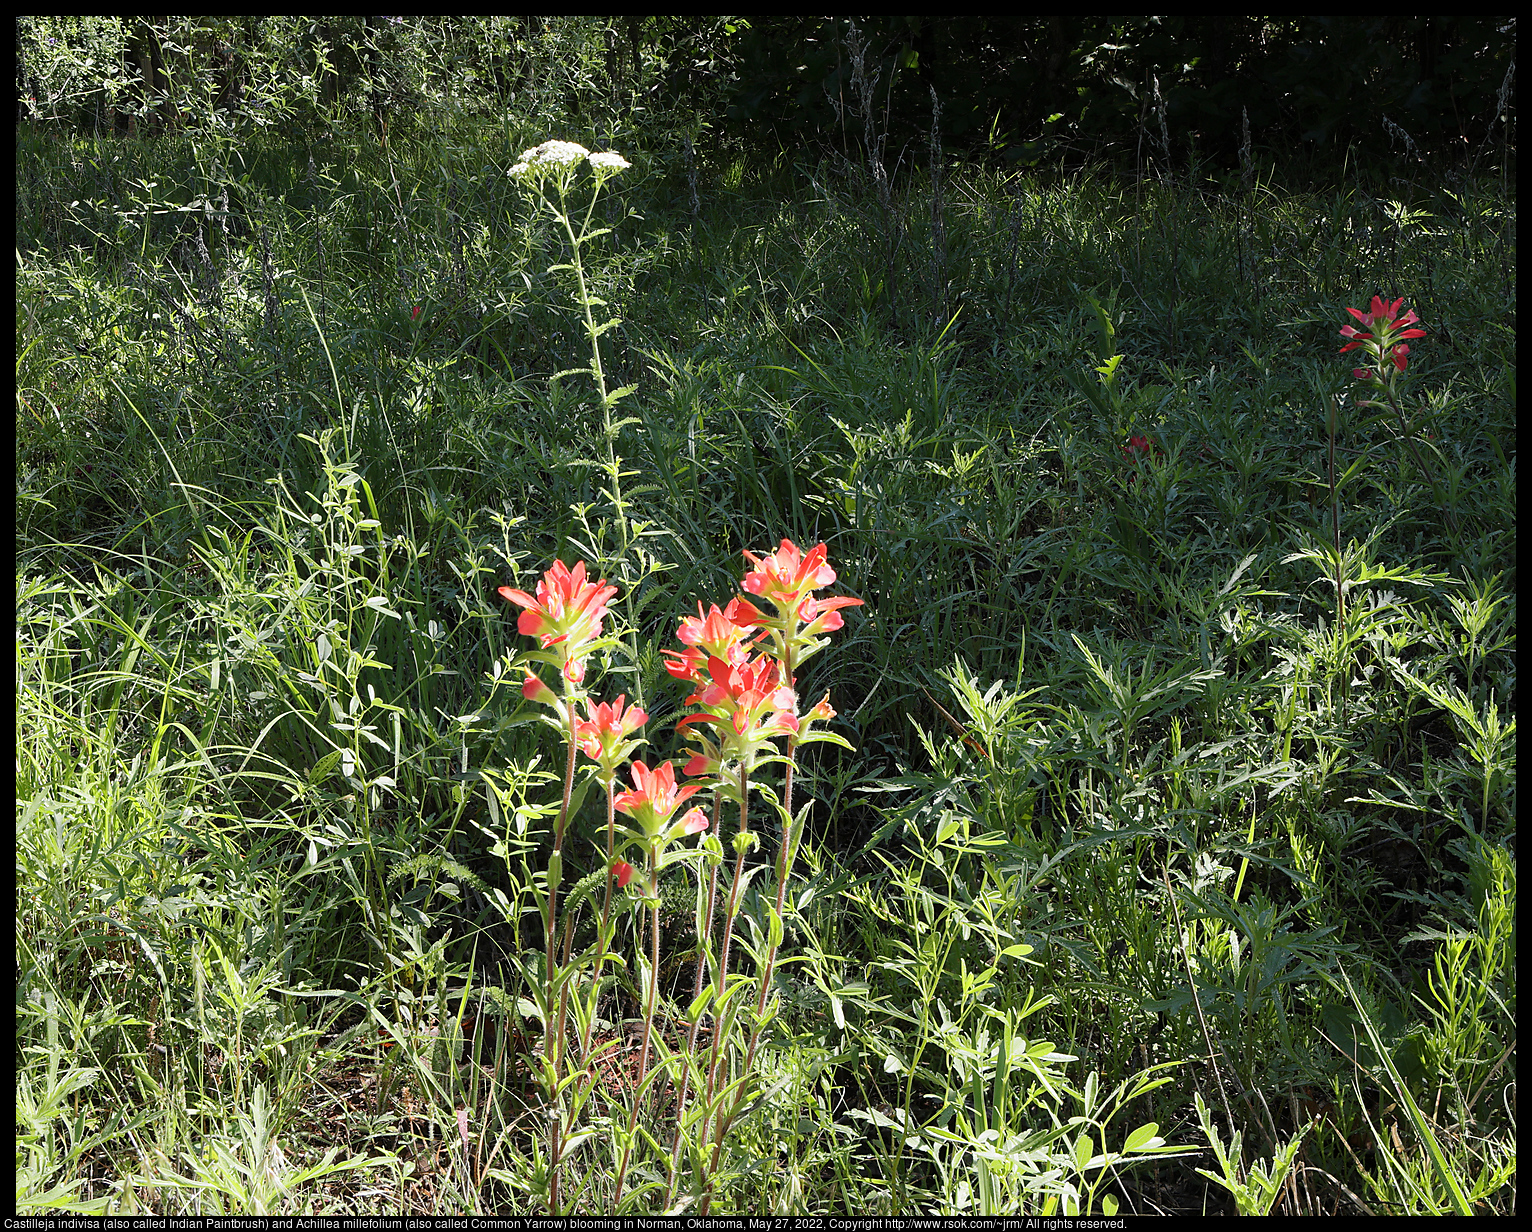 Castilleja indivisa (also called Indian Paintbrush) and Achillea millefolium (also called Common Yarrow) blooming in Norman, Oklahoma, May 27, 2022